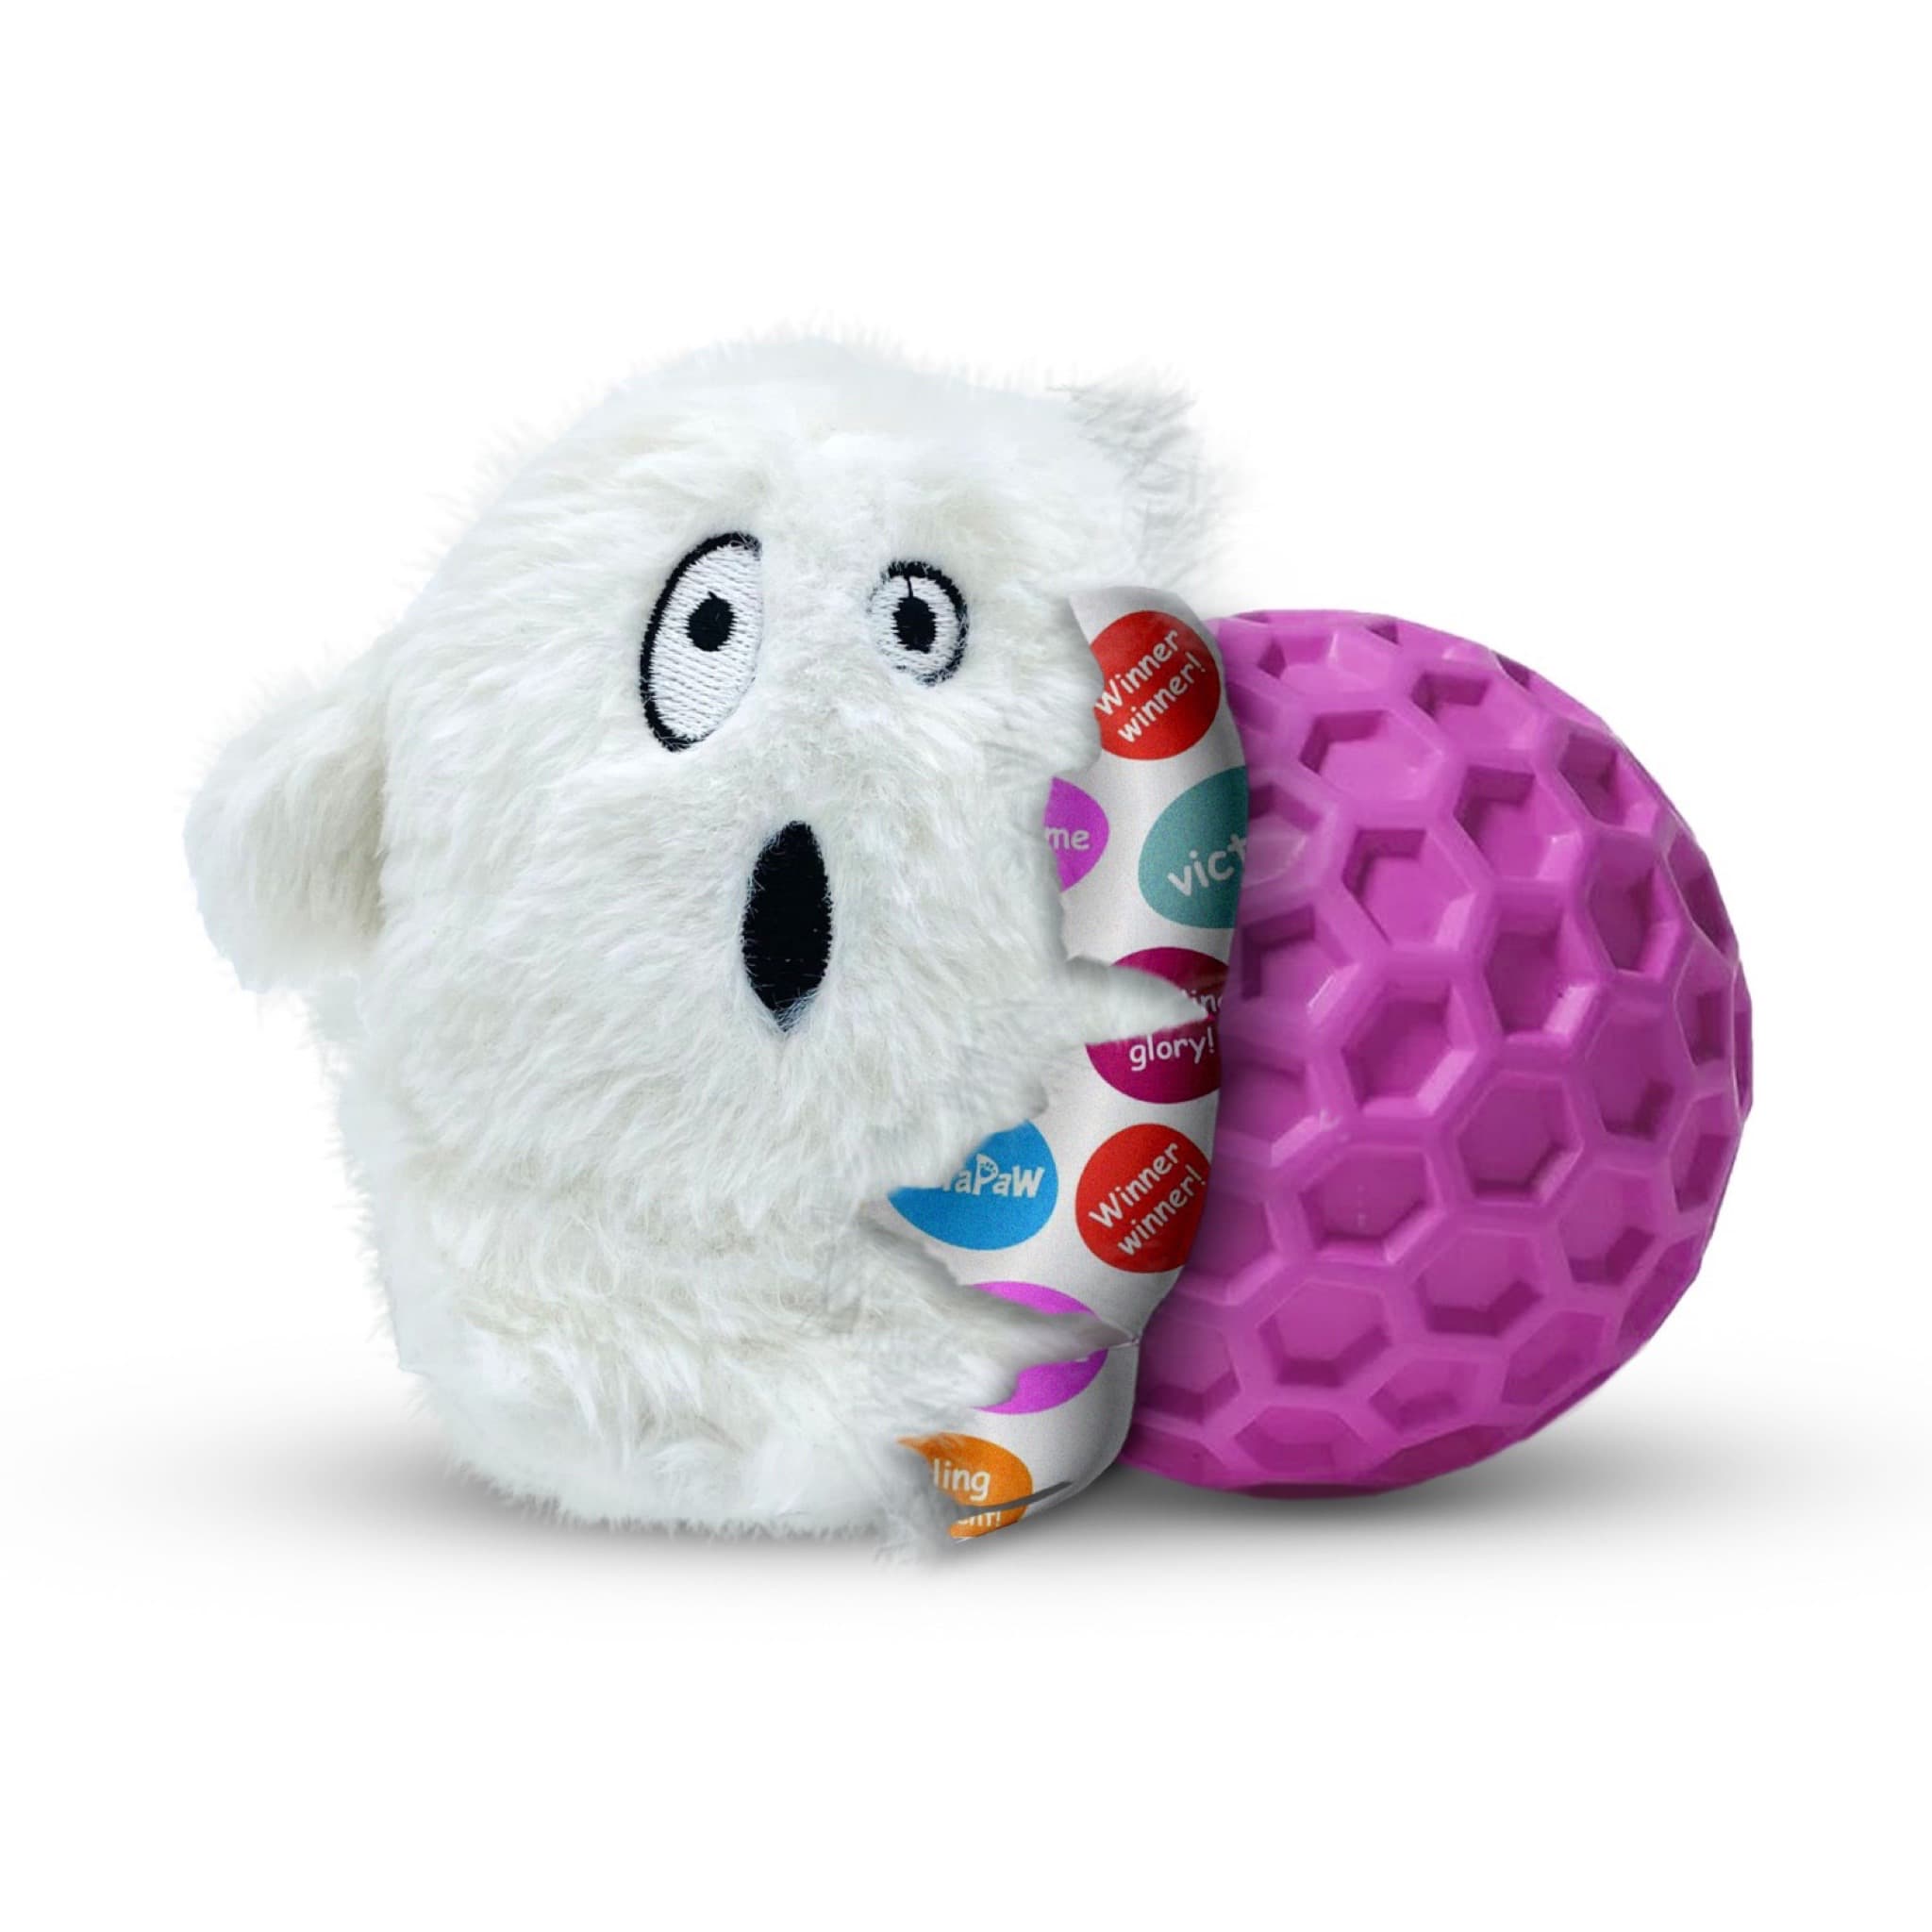 DuraPaw 2-in-1 Dog Toy Within Toy Canada Hidden Durable Surprise